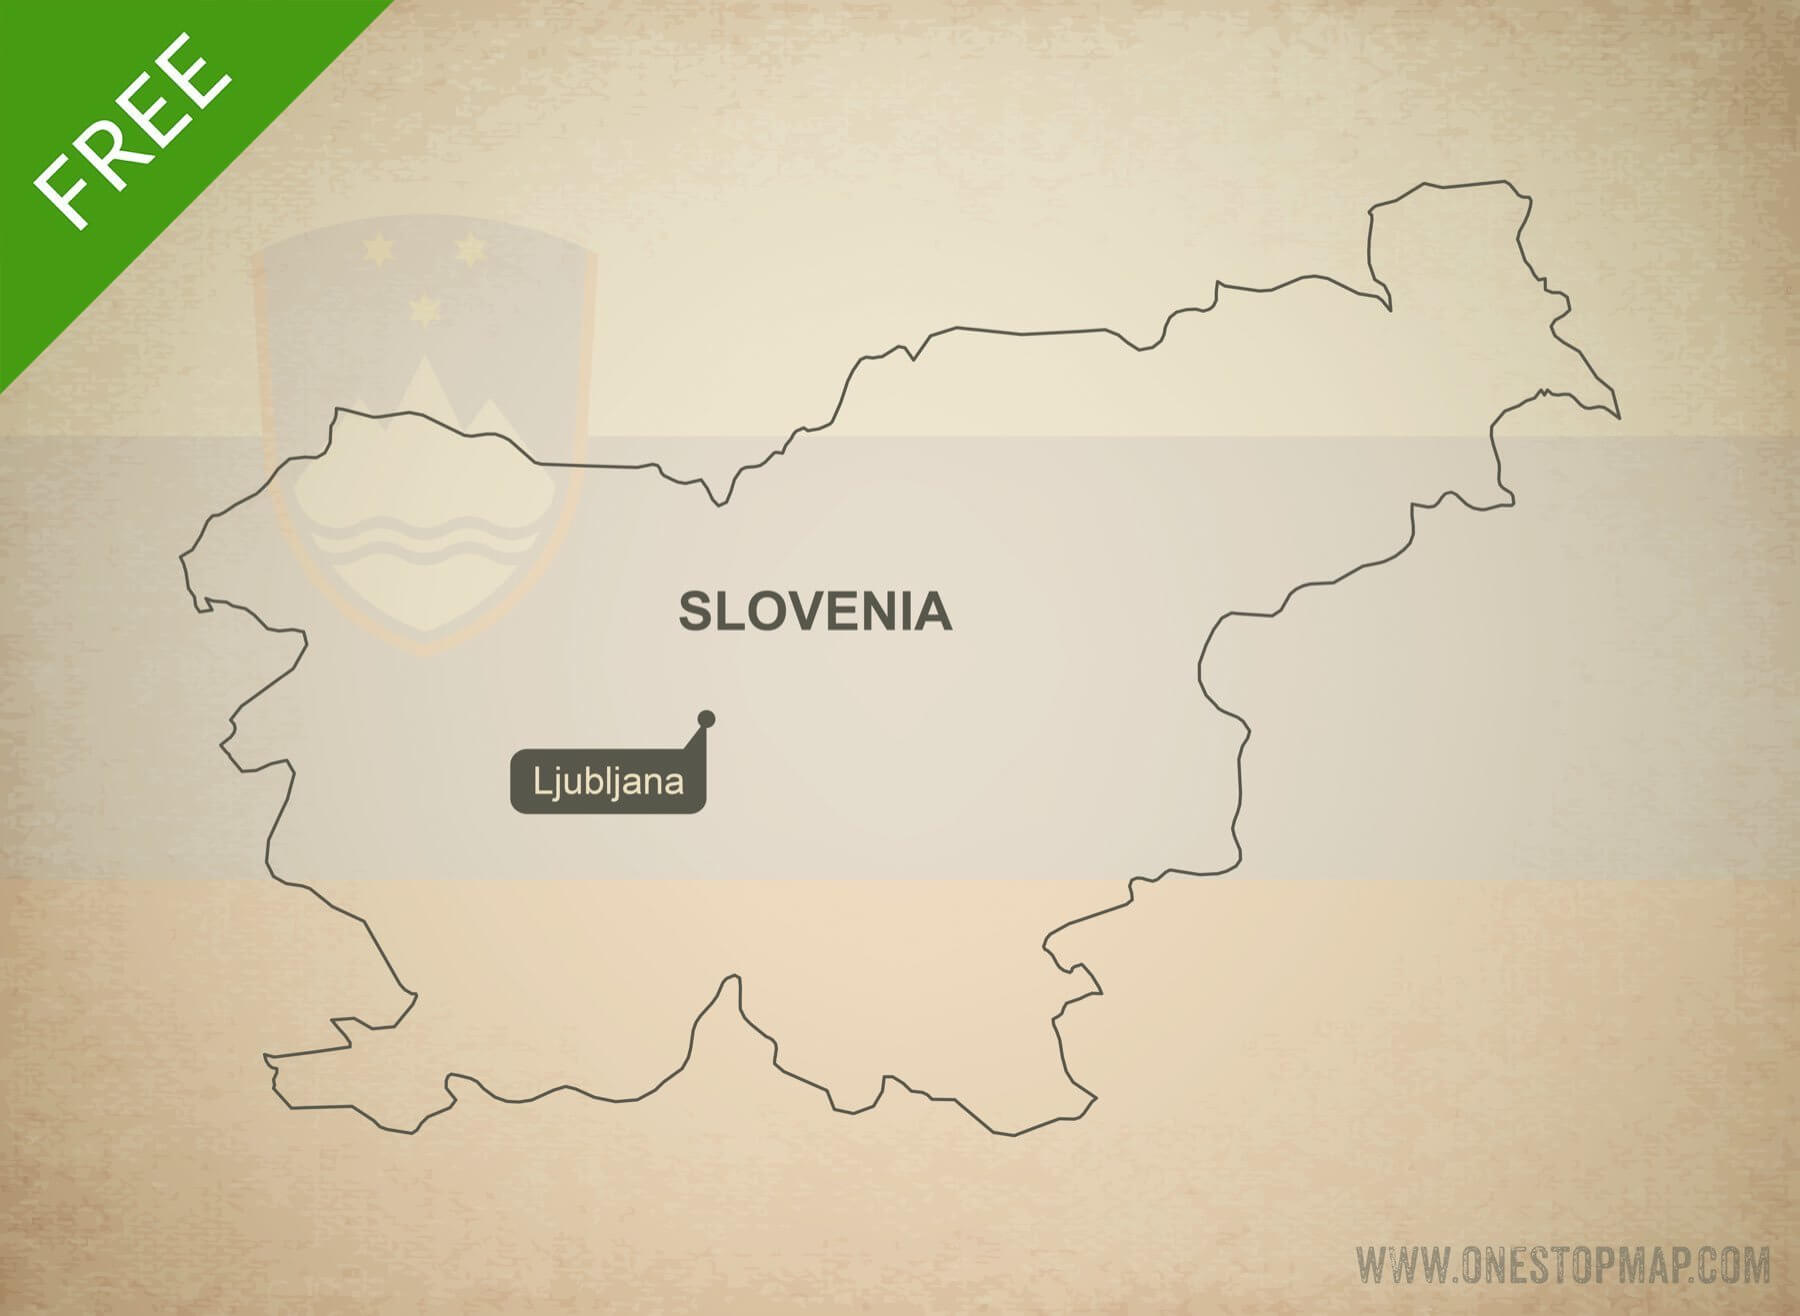 Free vector map of Slovenia outline